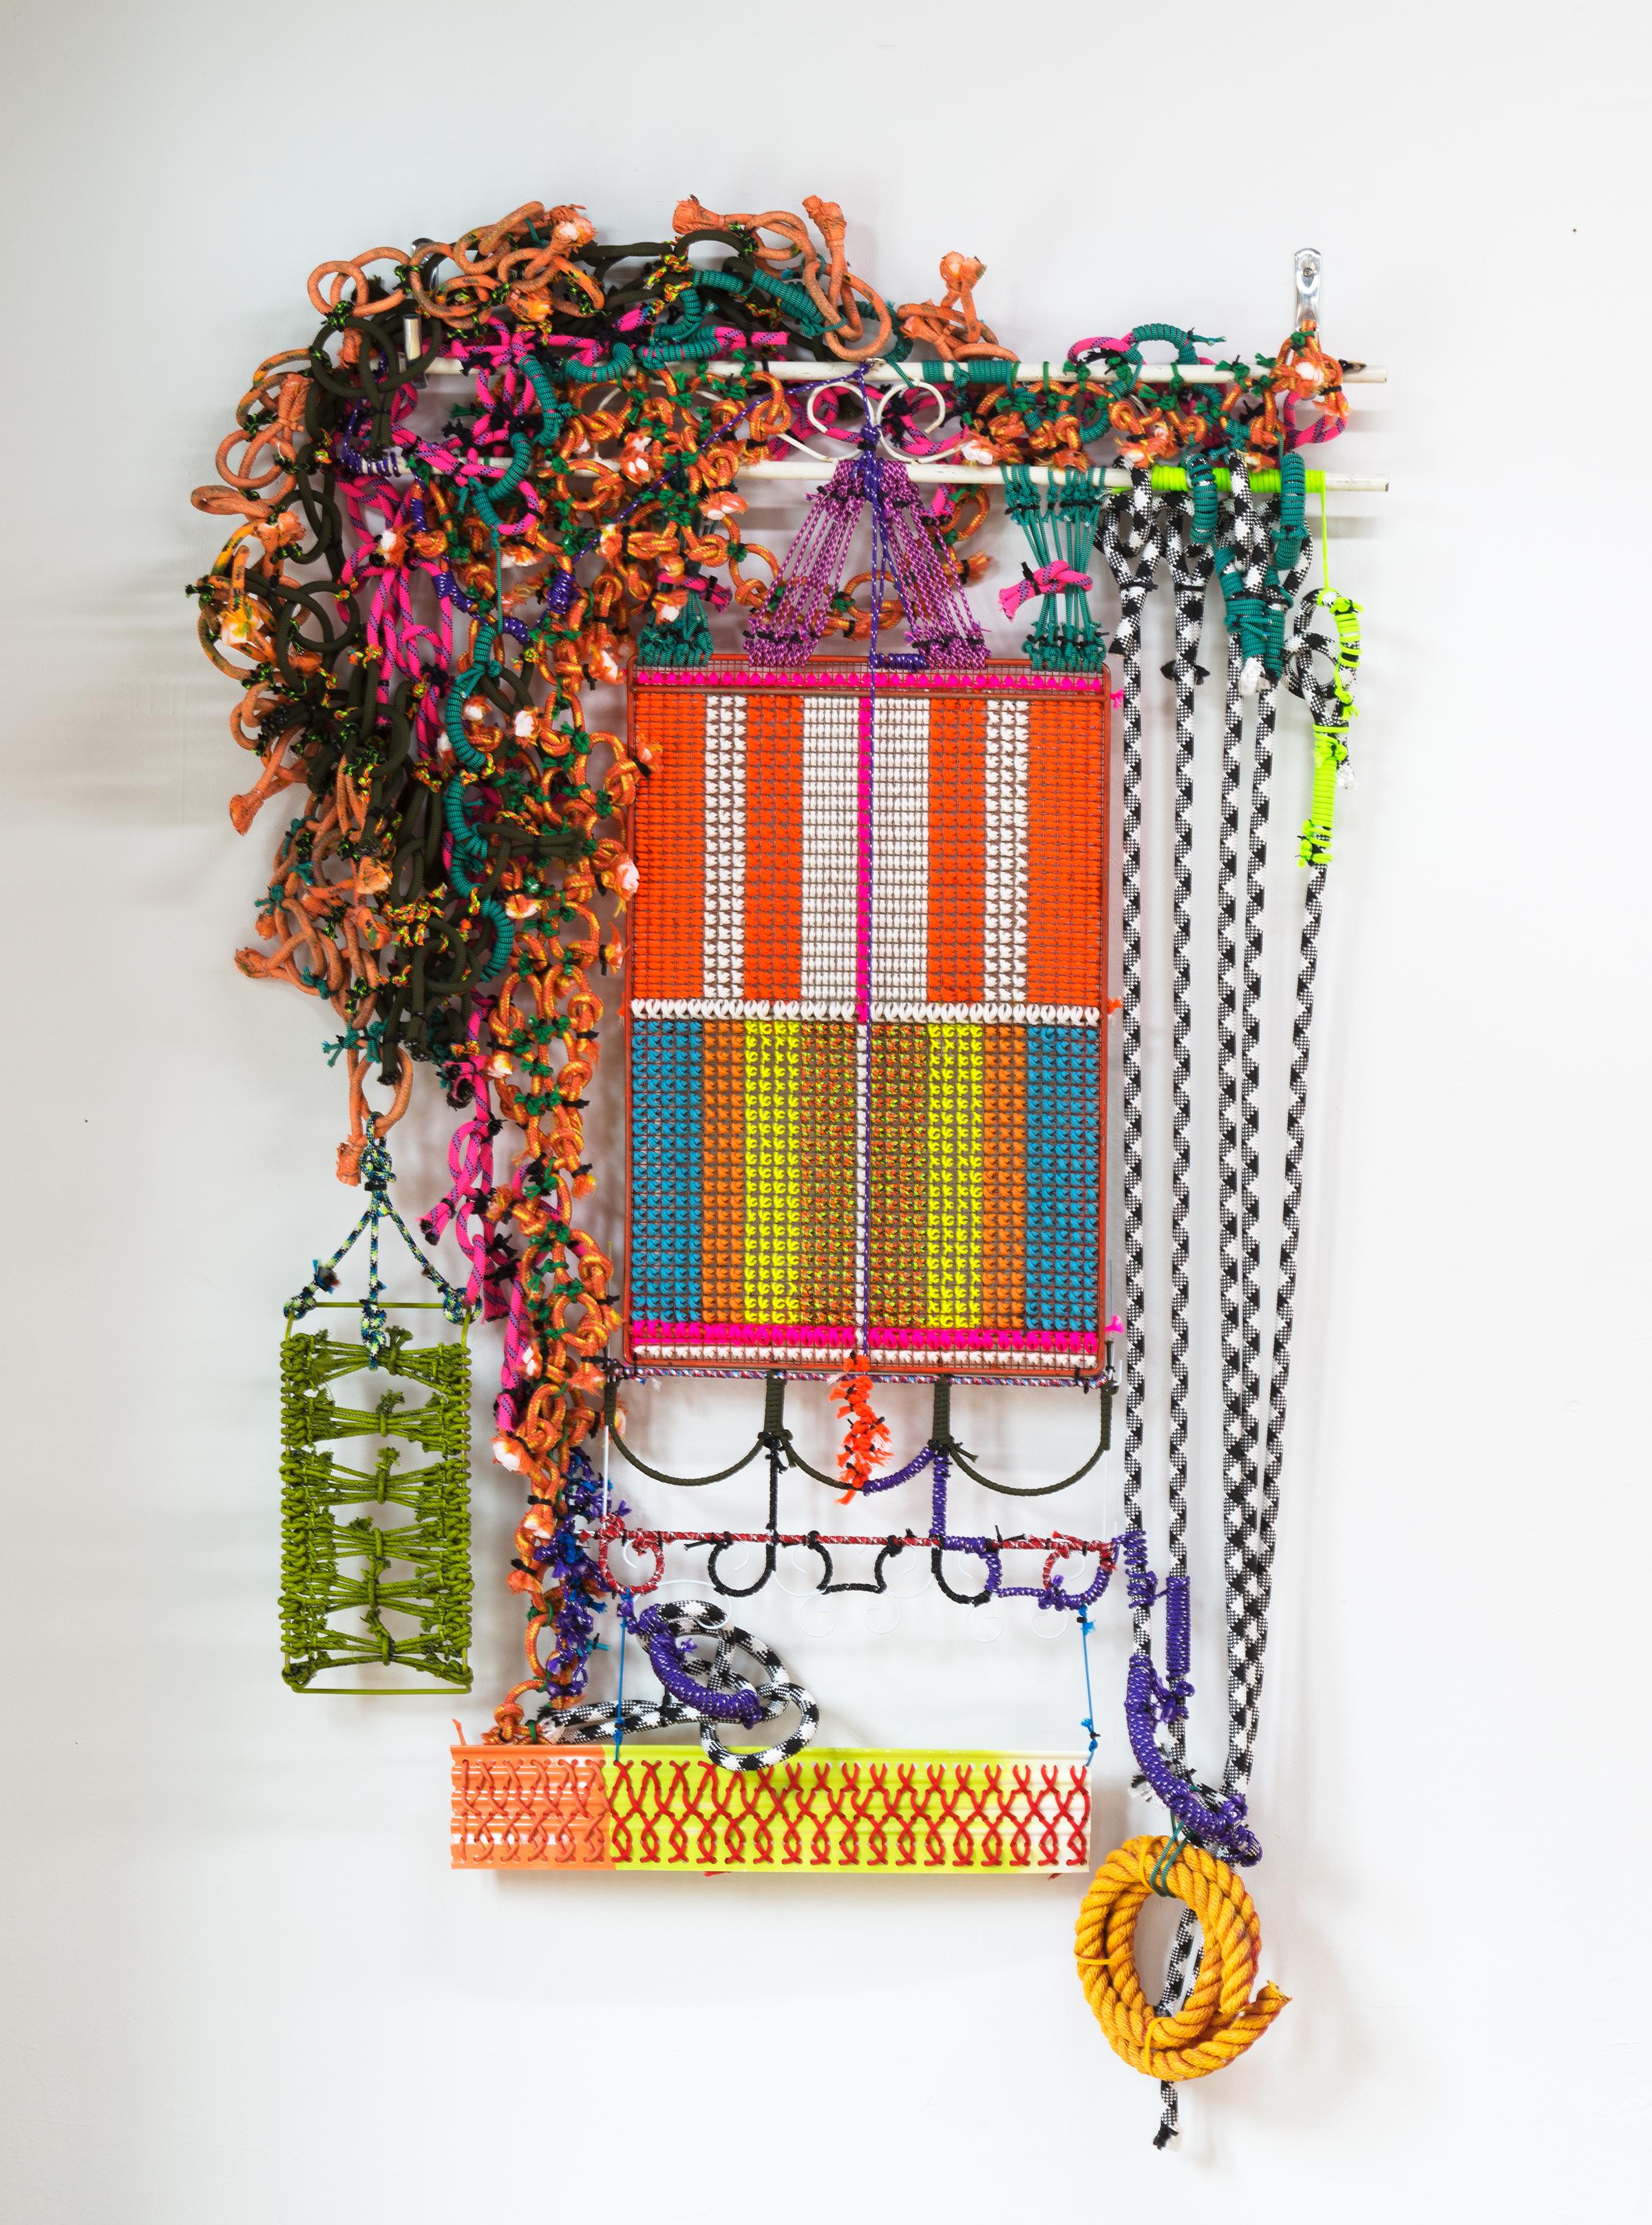 ARCHITECTURAL HYPERBOLE 04 Sculptural Wall Hanging w/ Found & Repurposed Objects - Mixed Media Art by Liz Miller